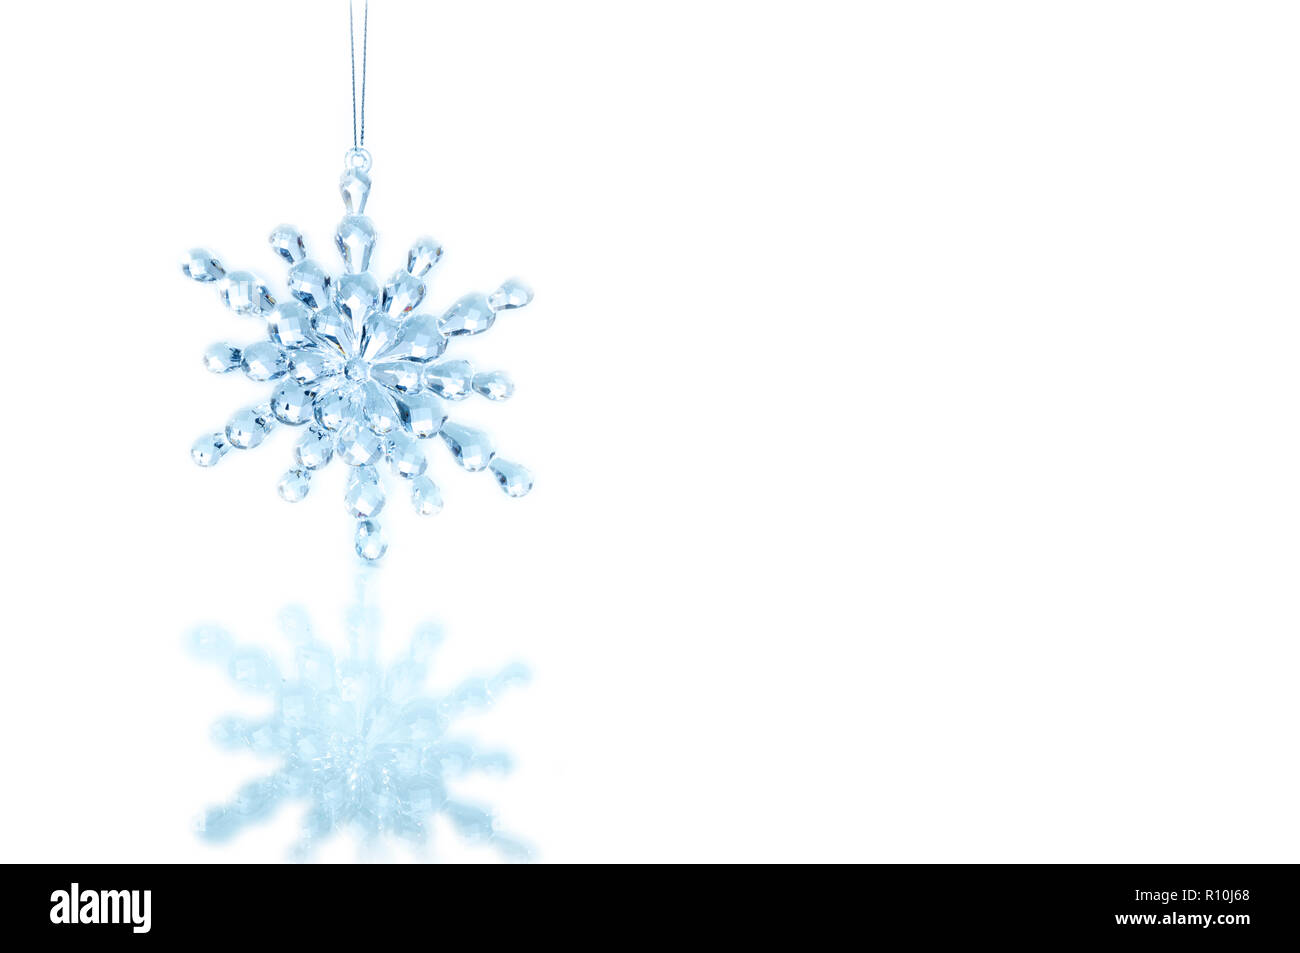 Glass snowflake Christmas decoration hanging over white surface with reflection Stock Photo